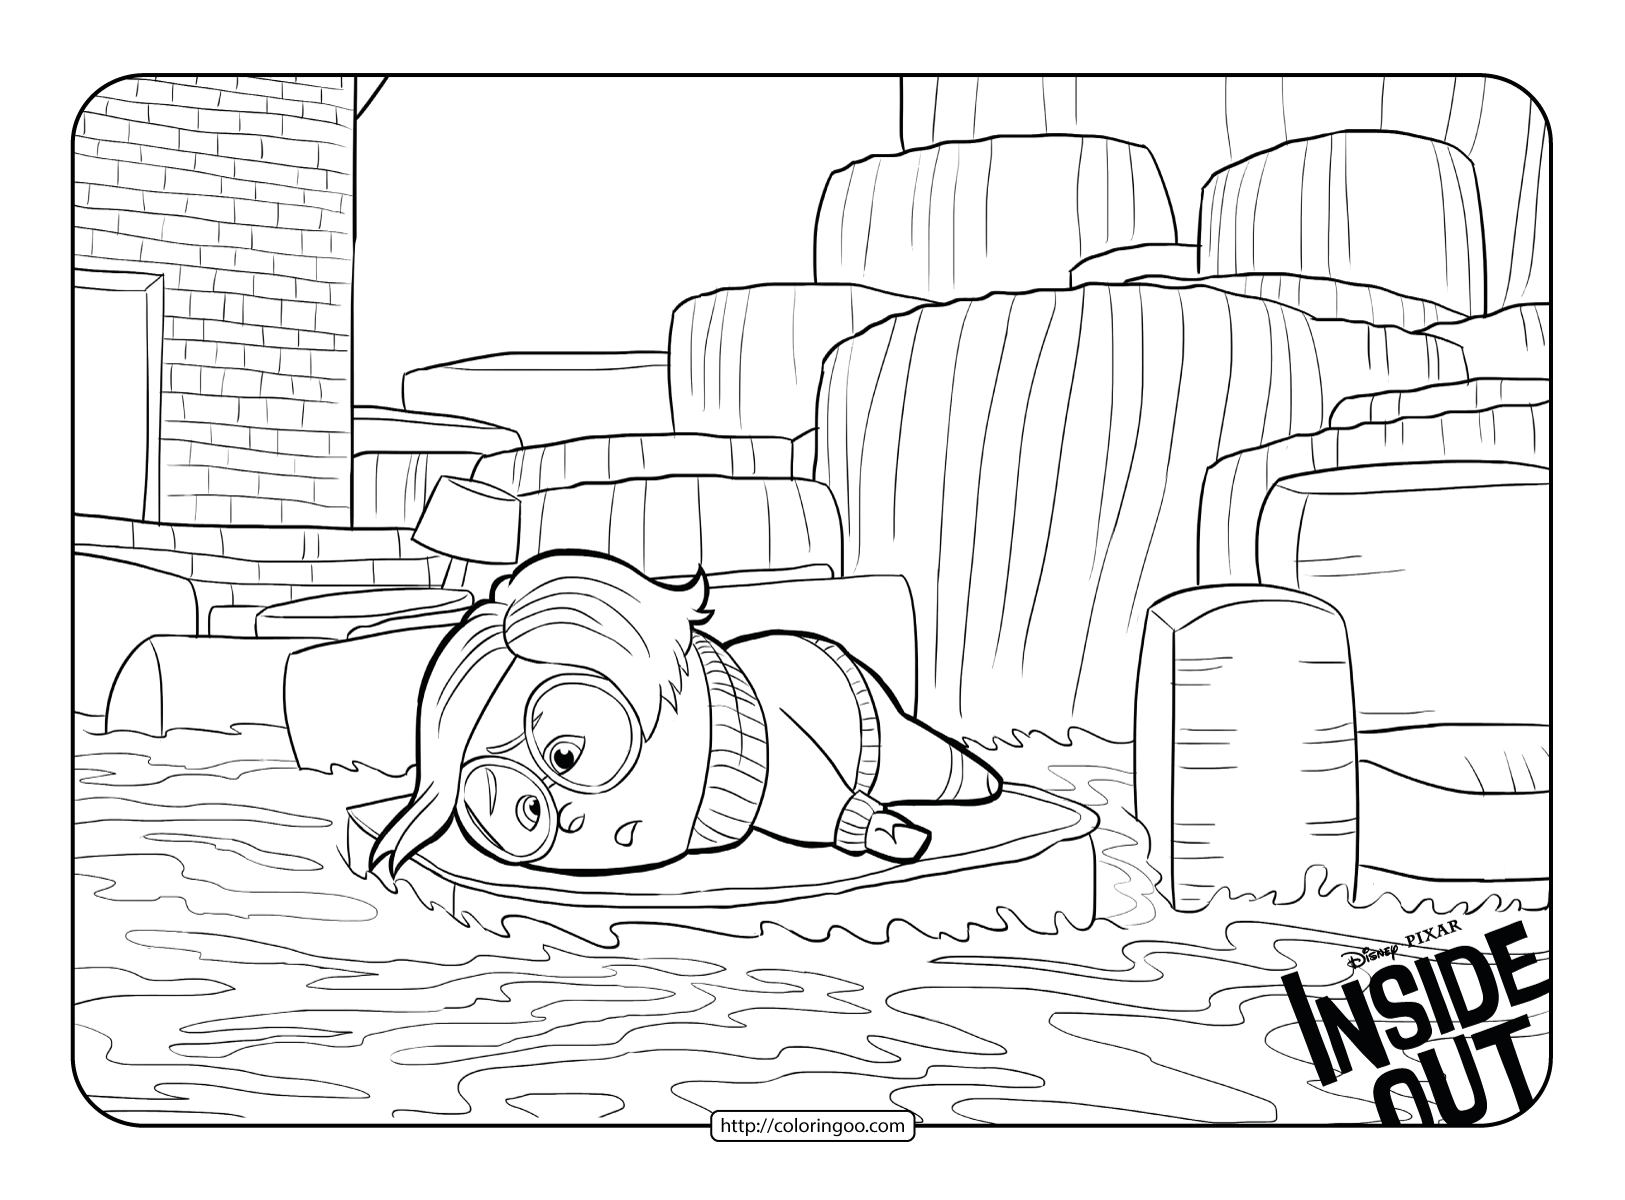 sadness from inside out coloring sheet